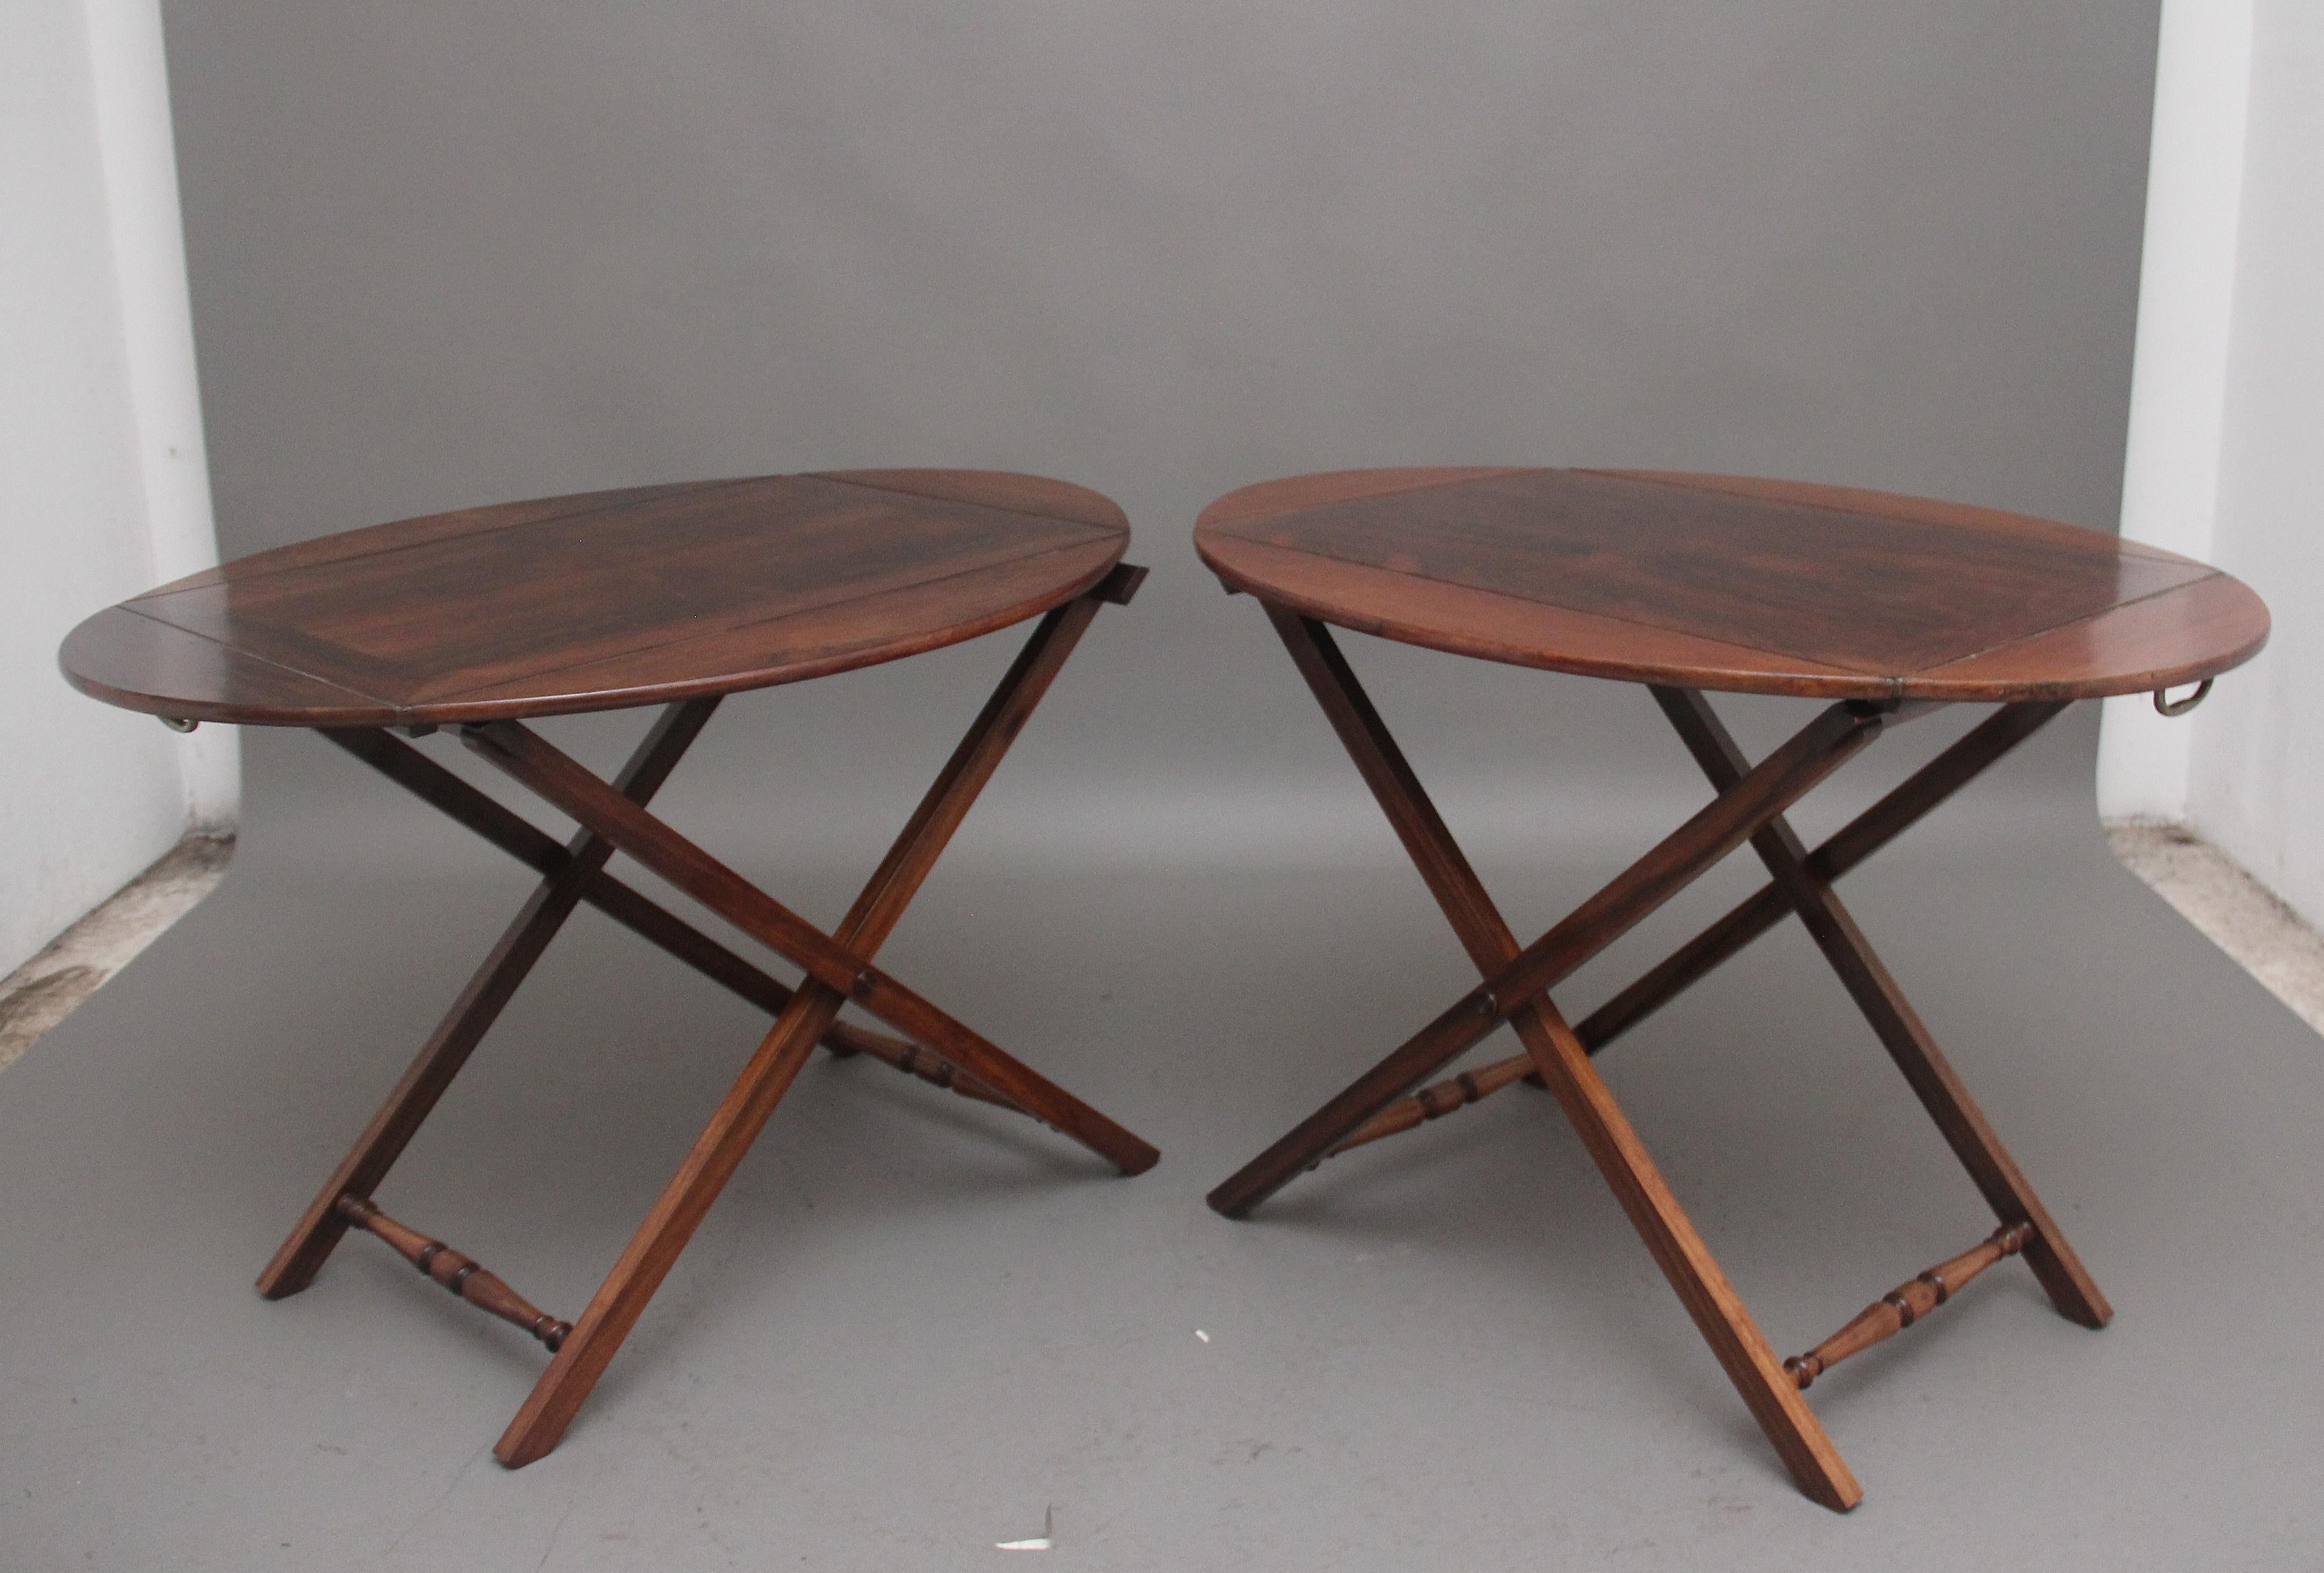 A pair of 19th Century rosewood folding butlers tray on stands of exceptional quality, the rectangular panelled tray has four folding sides with inset brass hinges, either end of the tray having the original brass carrying handles, wonderful